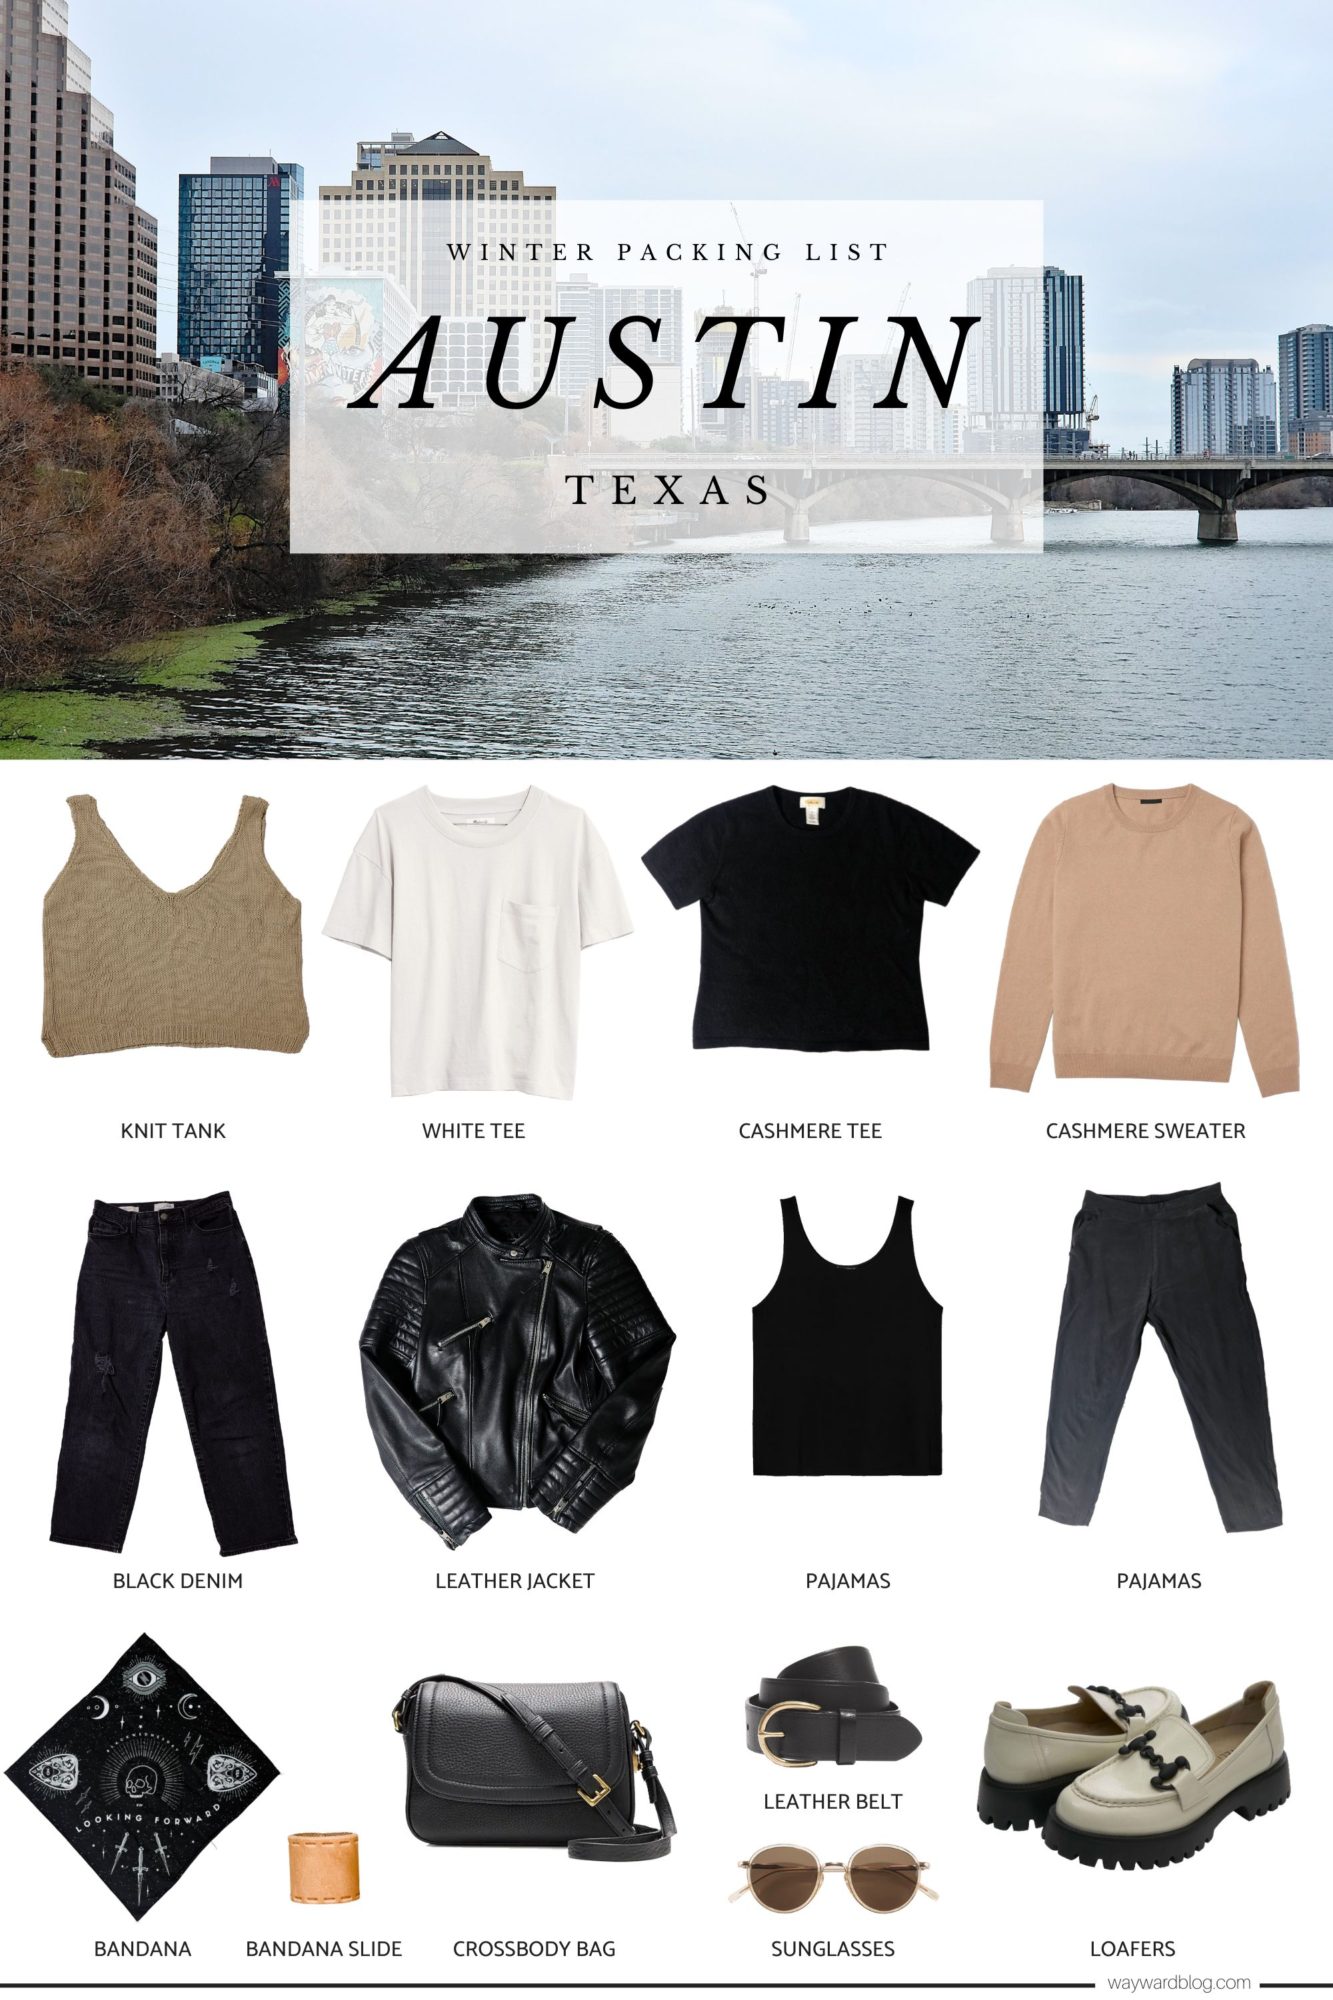 Collage of all clothing in the packing list for Austin, Texas